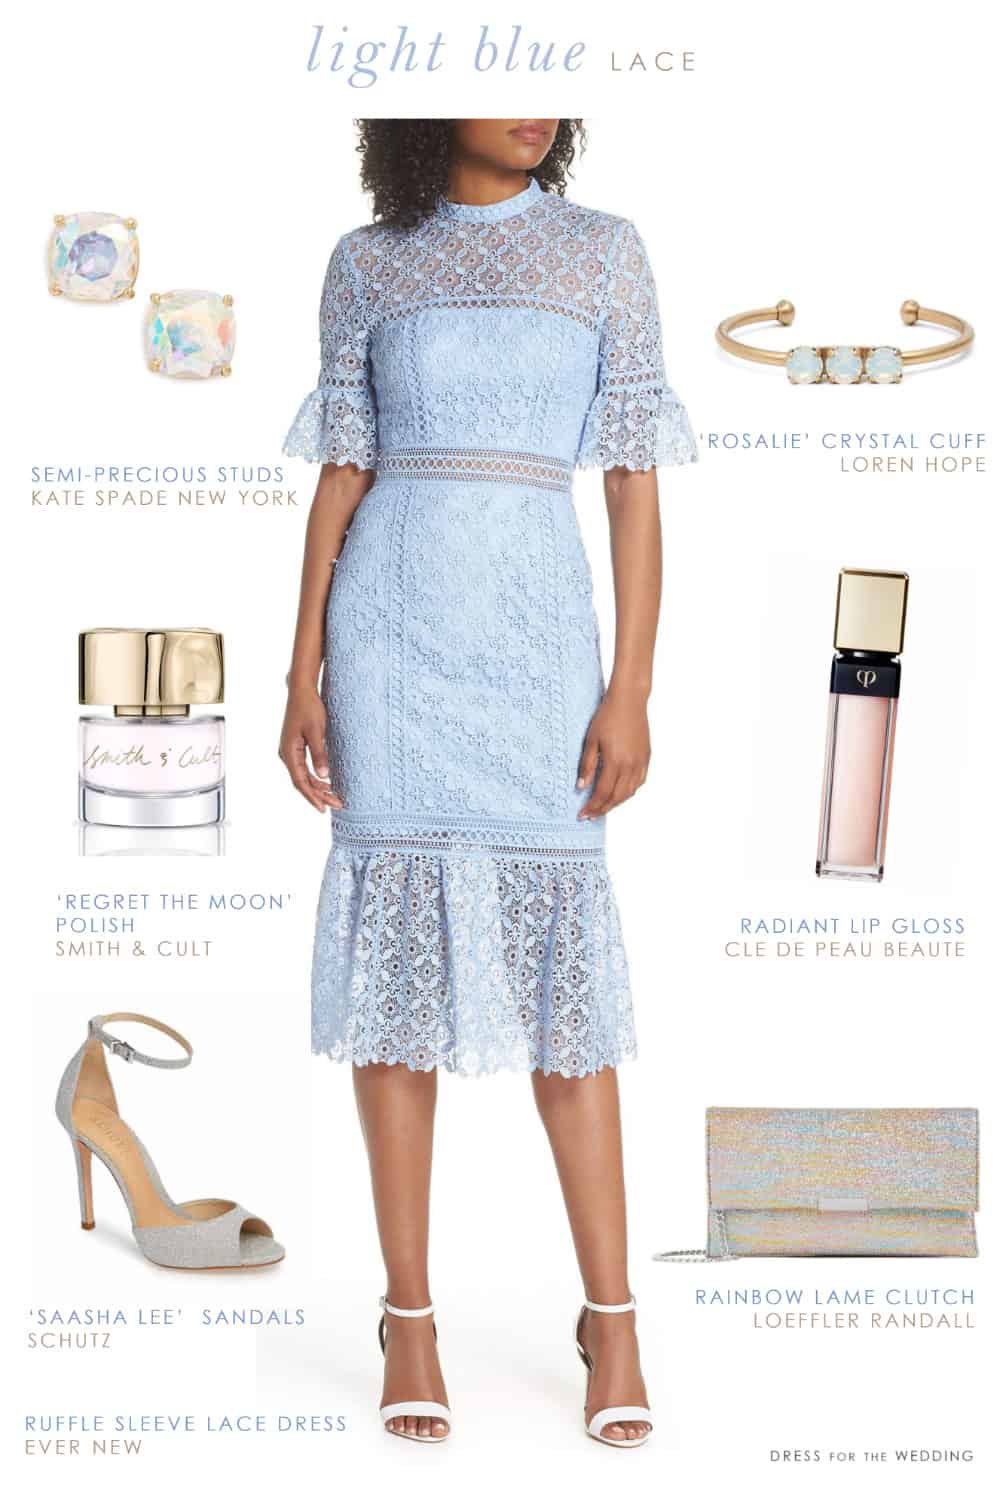 shoes to wear with light blue dress